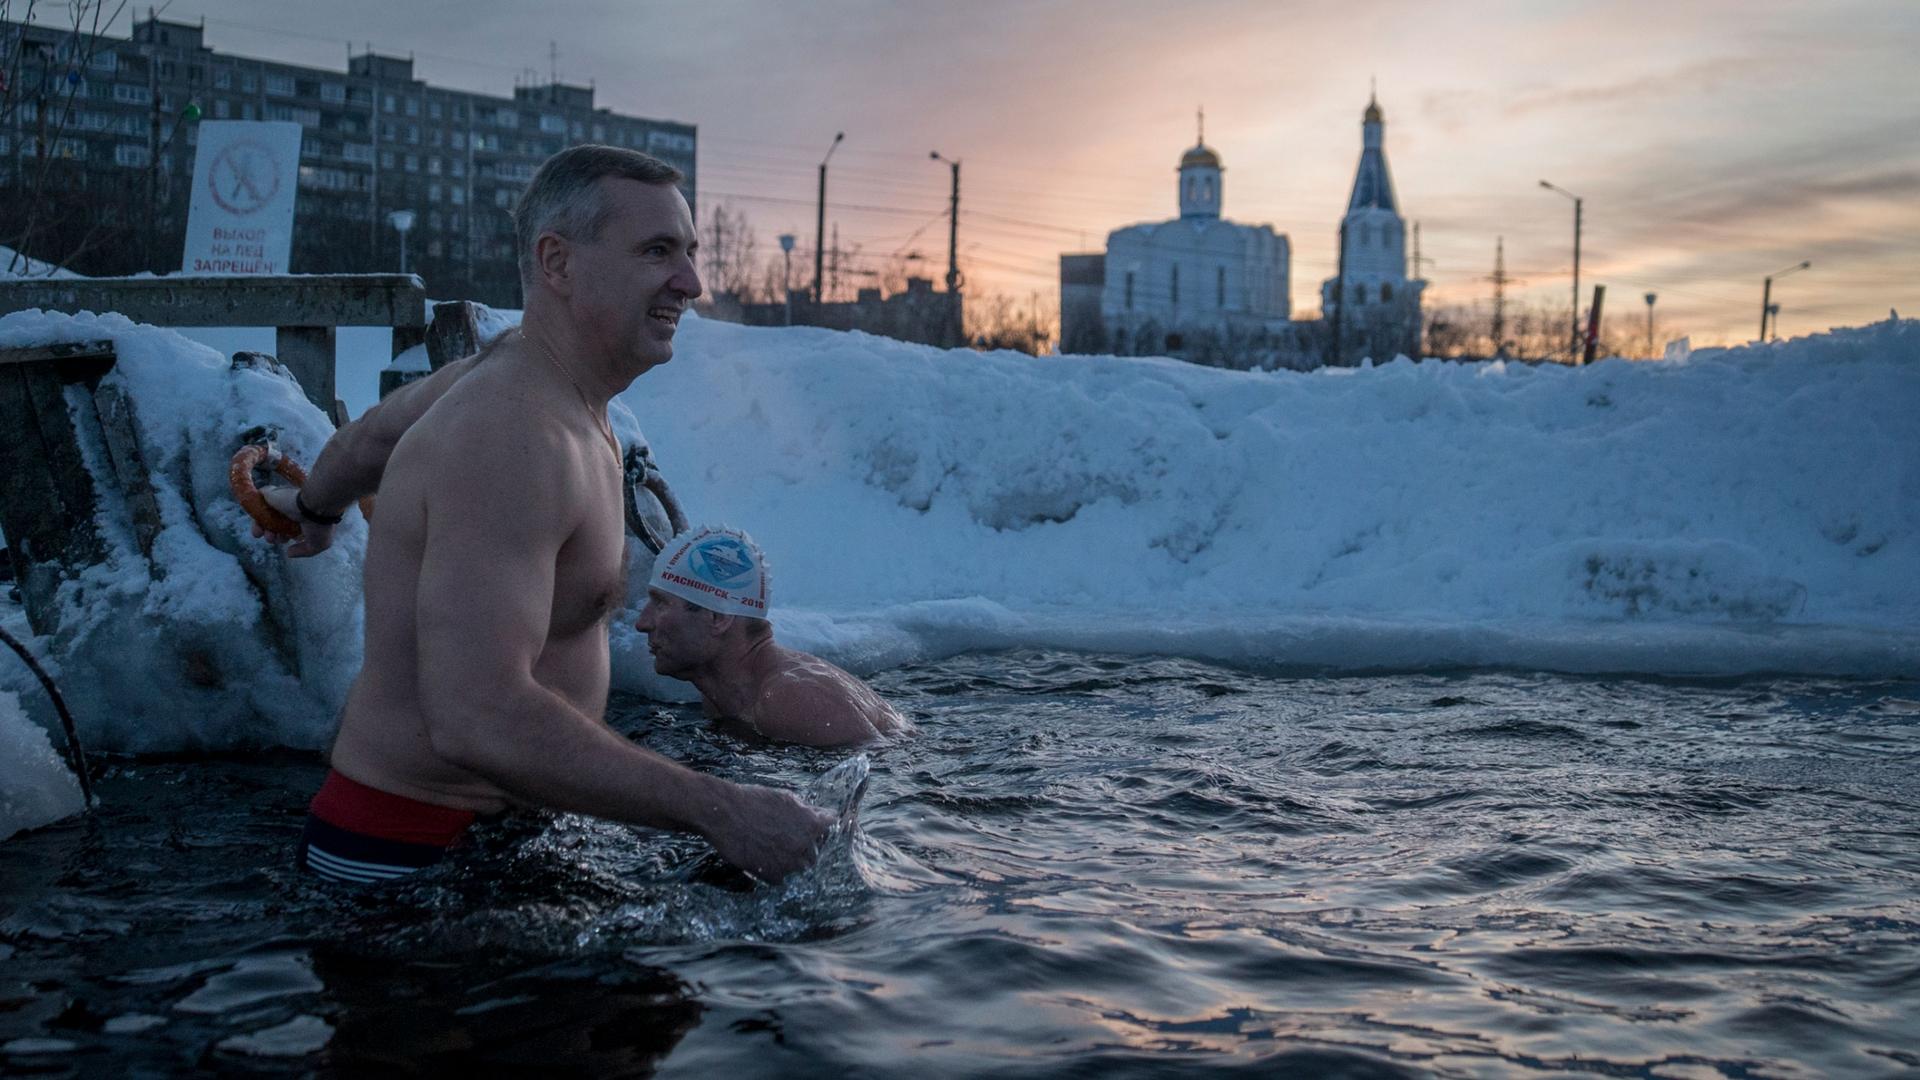 Alexander Spinul is shown without his shirt on and swims in an ice hole.